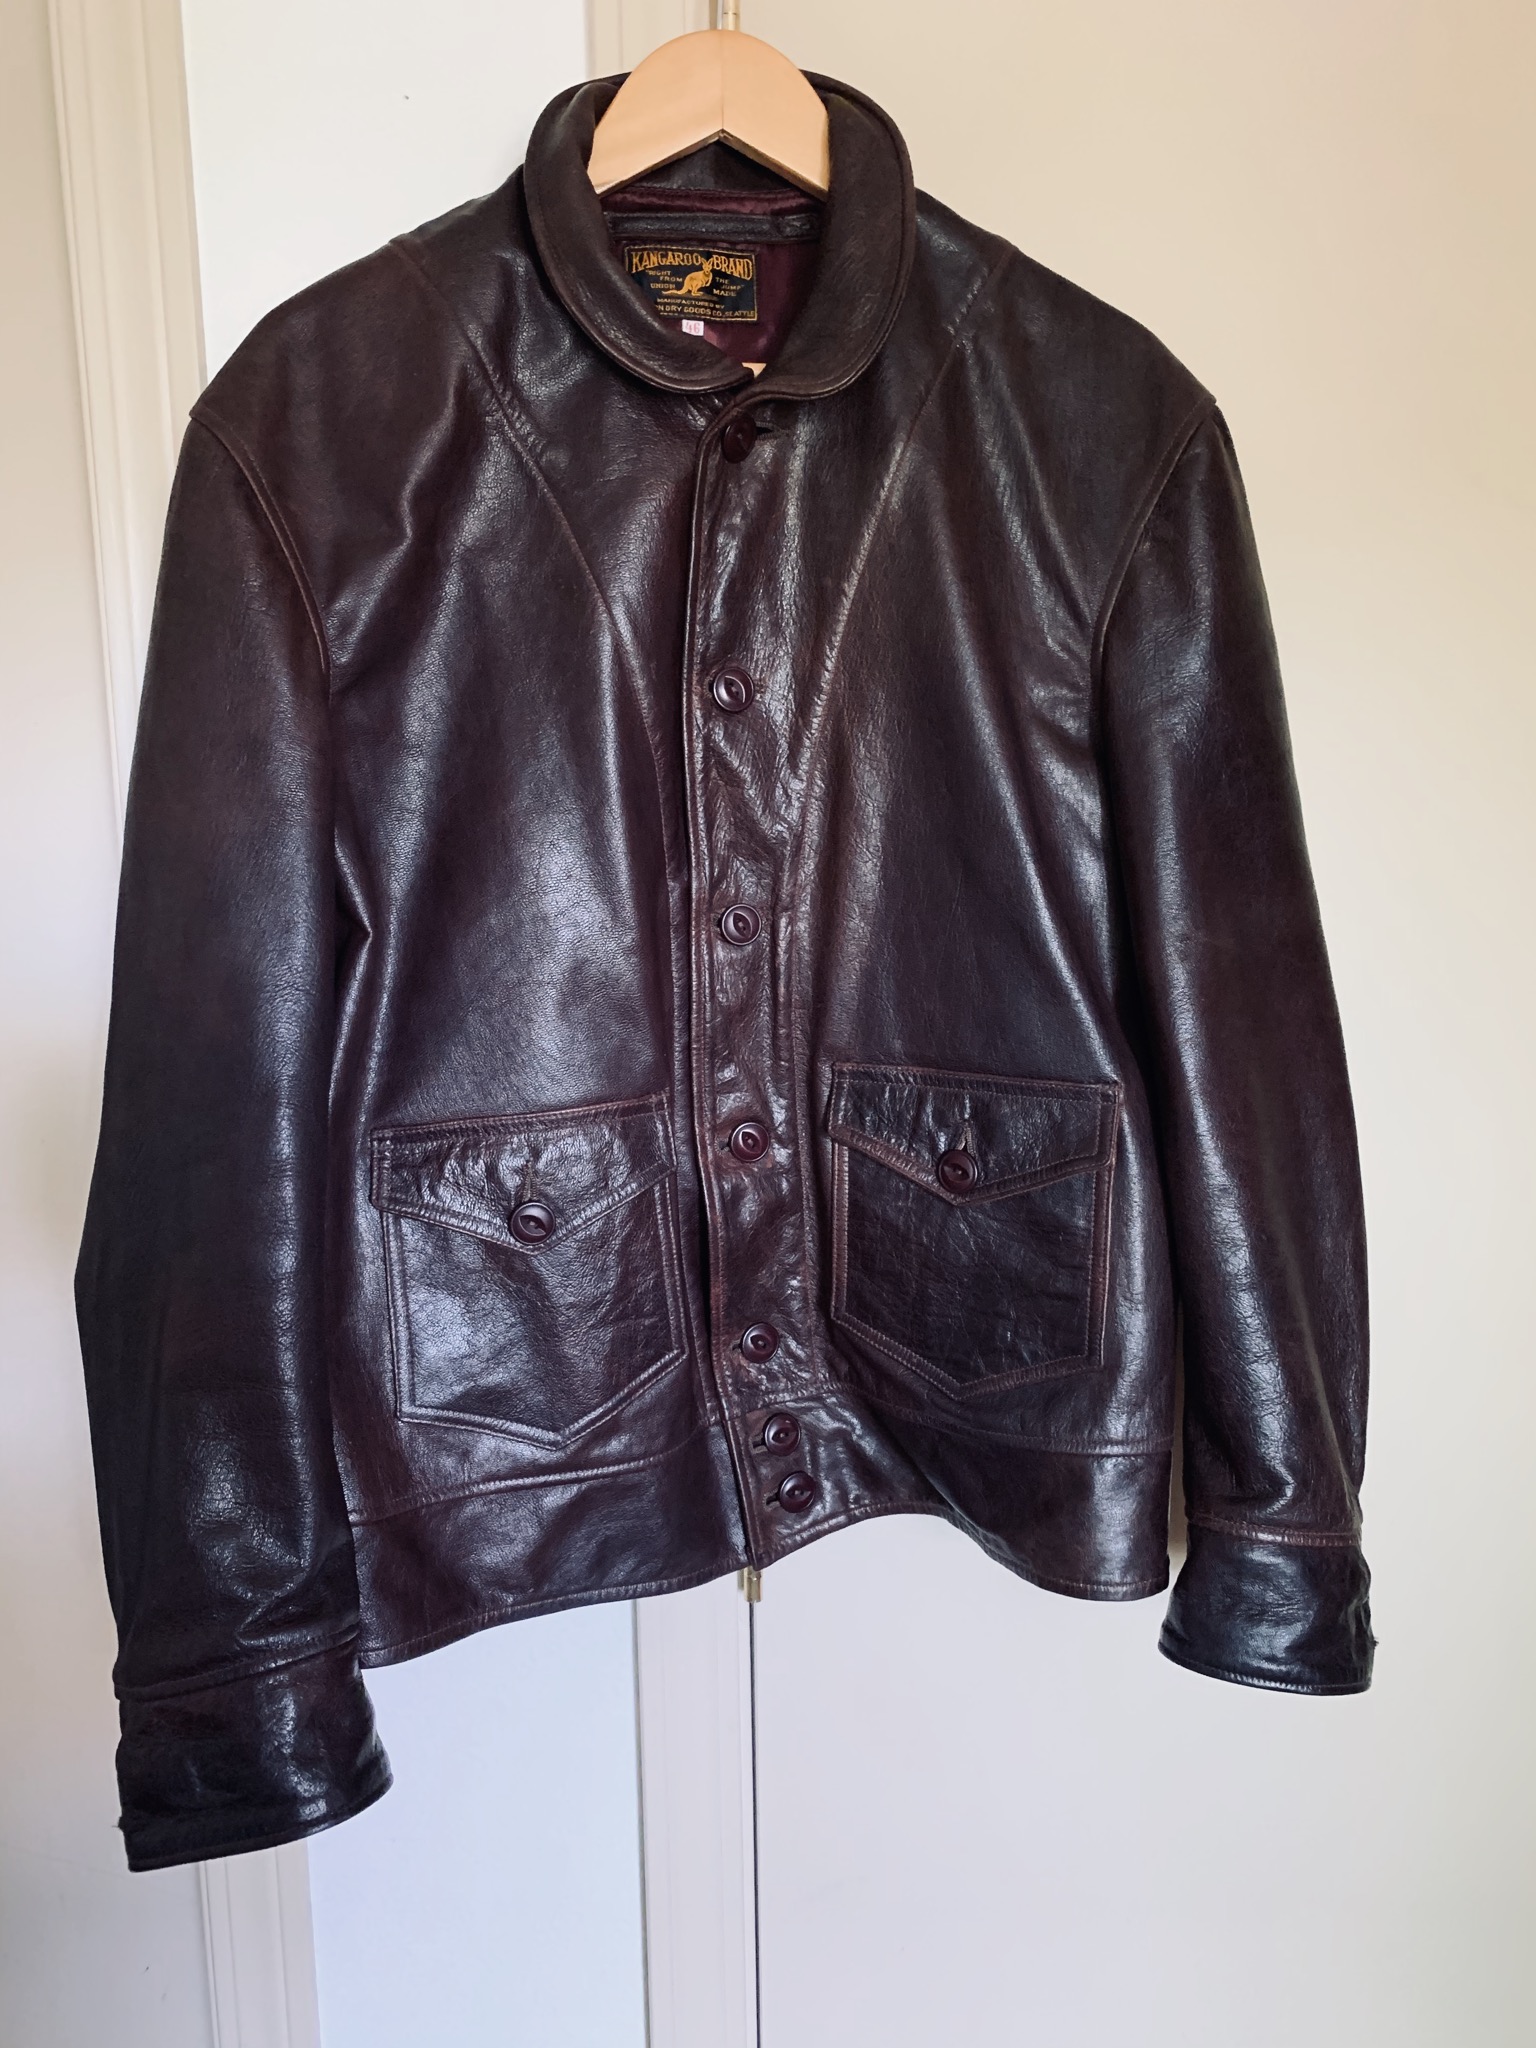 Cossack Jackets | Page 3 | Vintage Leather Jackets Forum